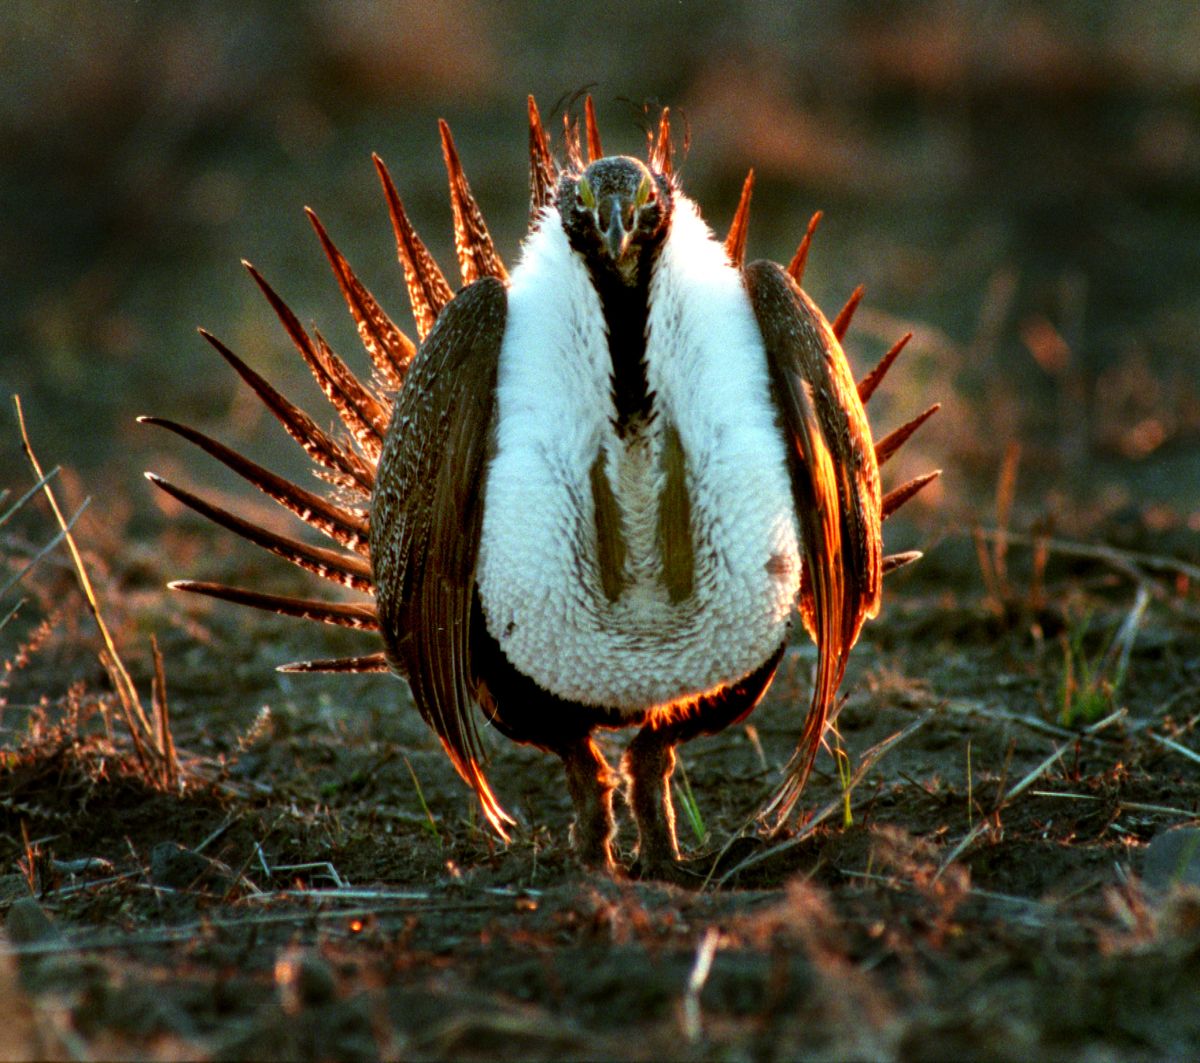 Sage grouse reintroduction to Lincoln County is the topic of a program this week sponsored by Spokane Audubon Society.  (The Spokesman-Review)